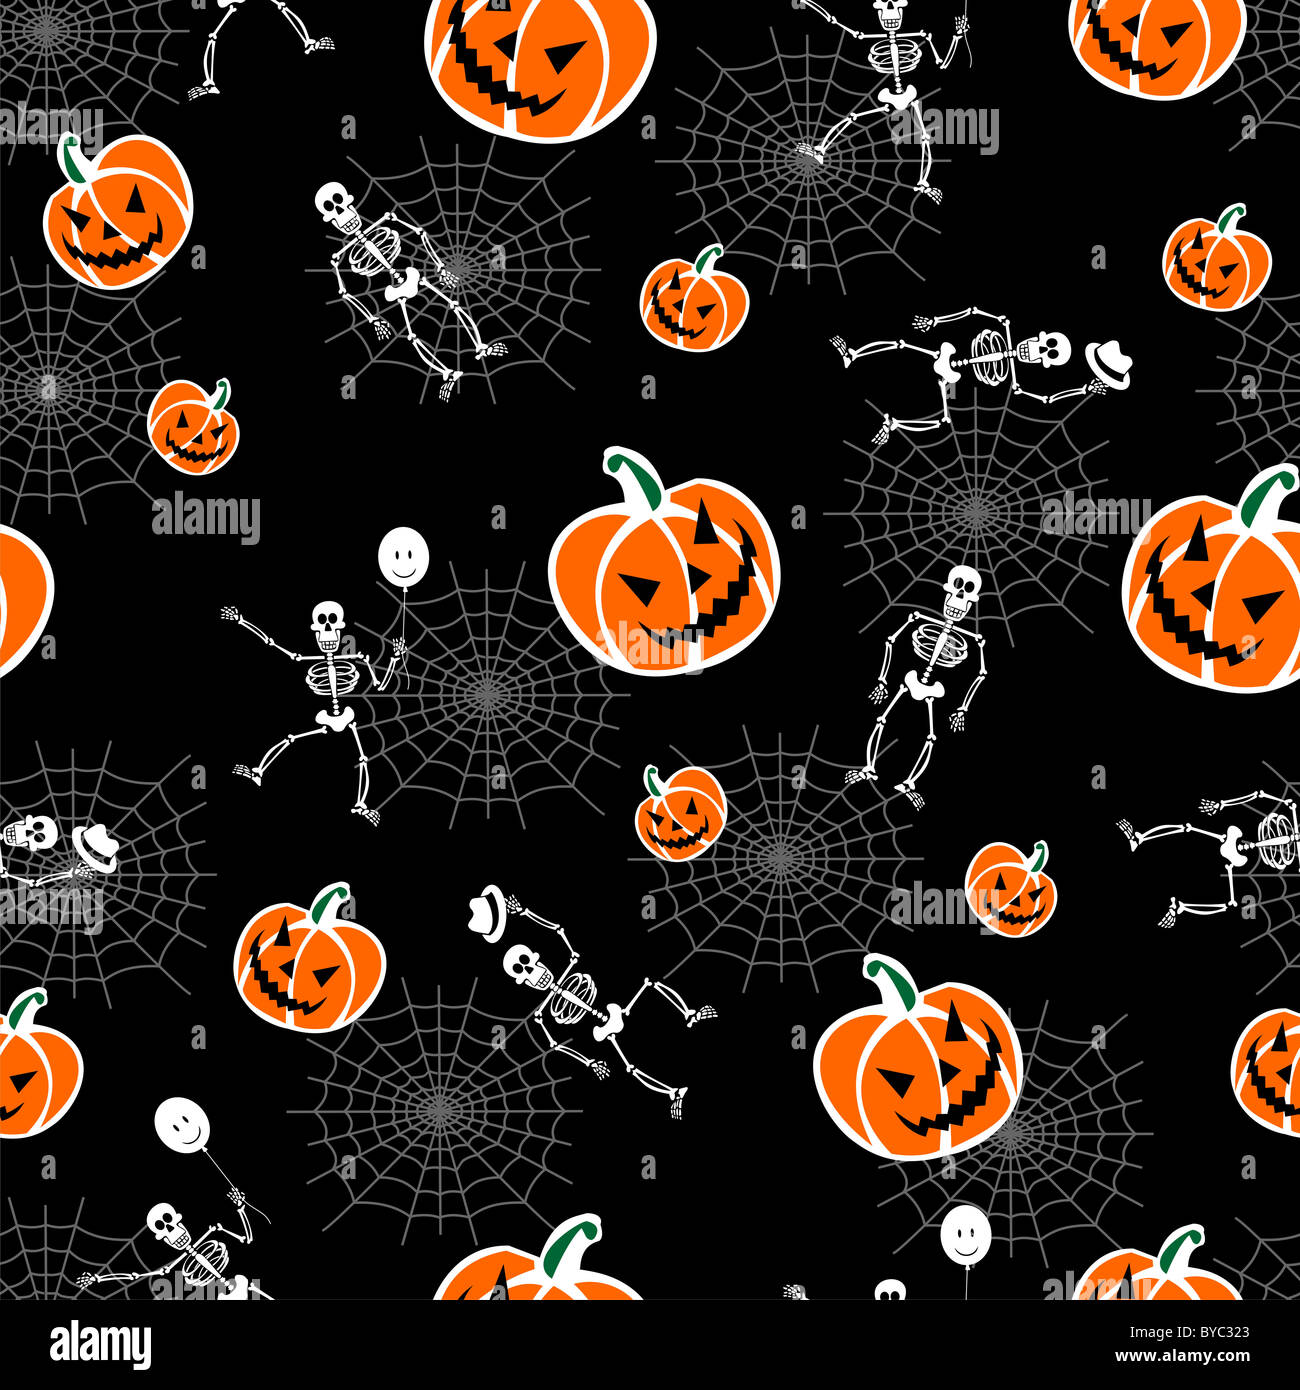 Download Aesthetic Halloween Background Skeleton Hand Peace Sign Pattern   Wallpaperscom